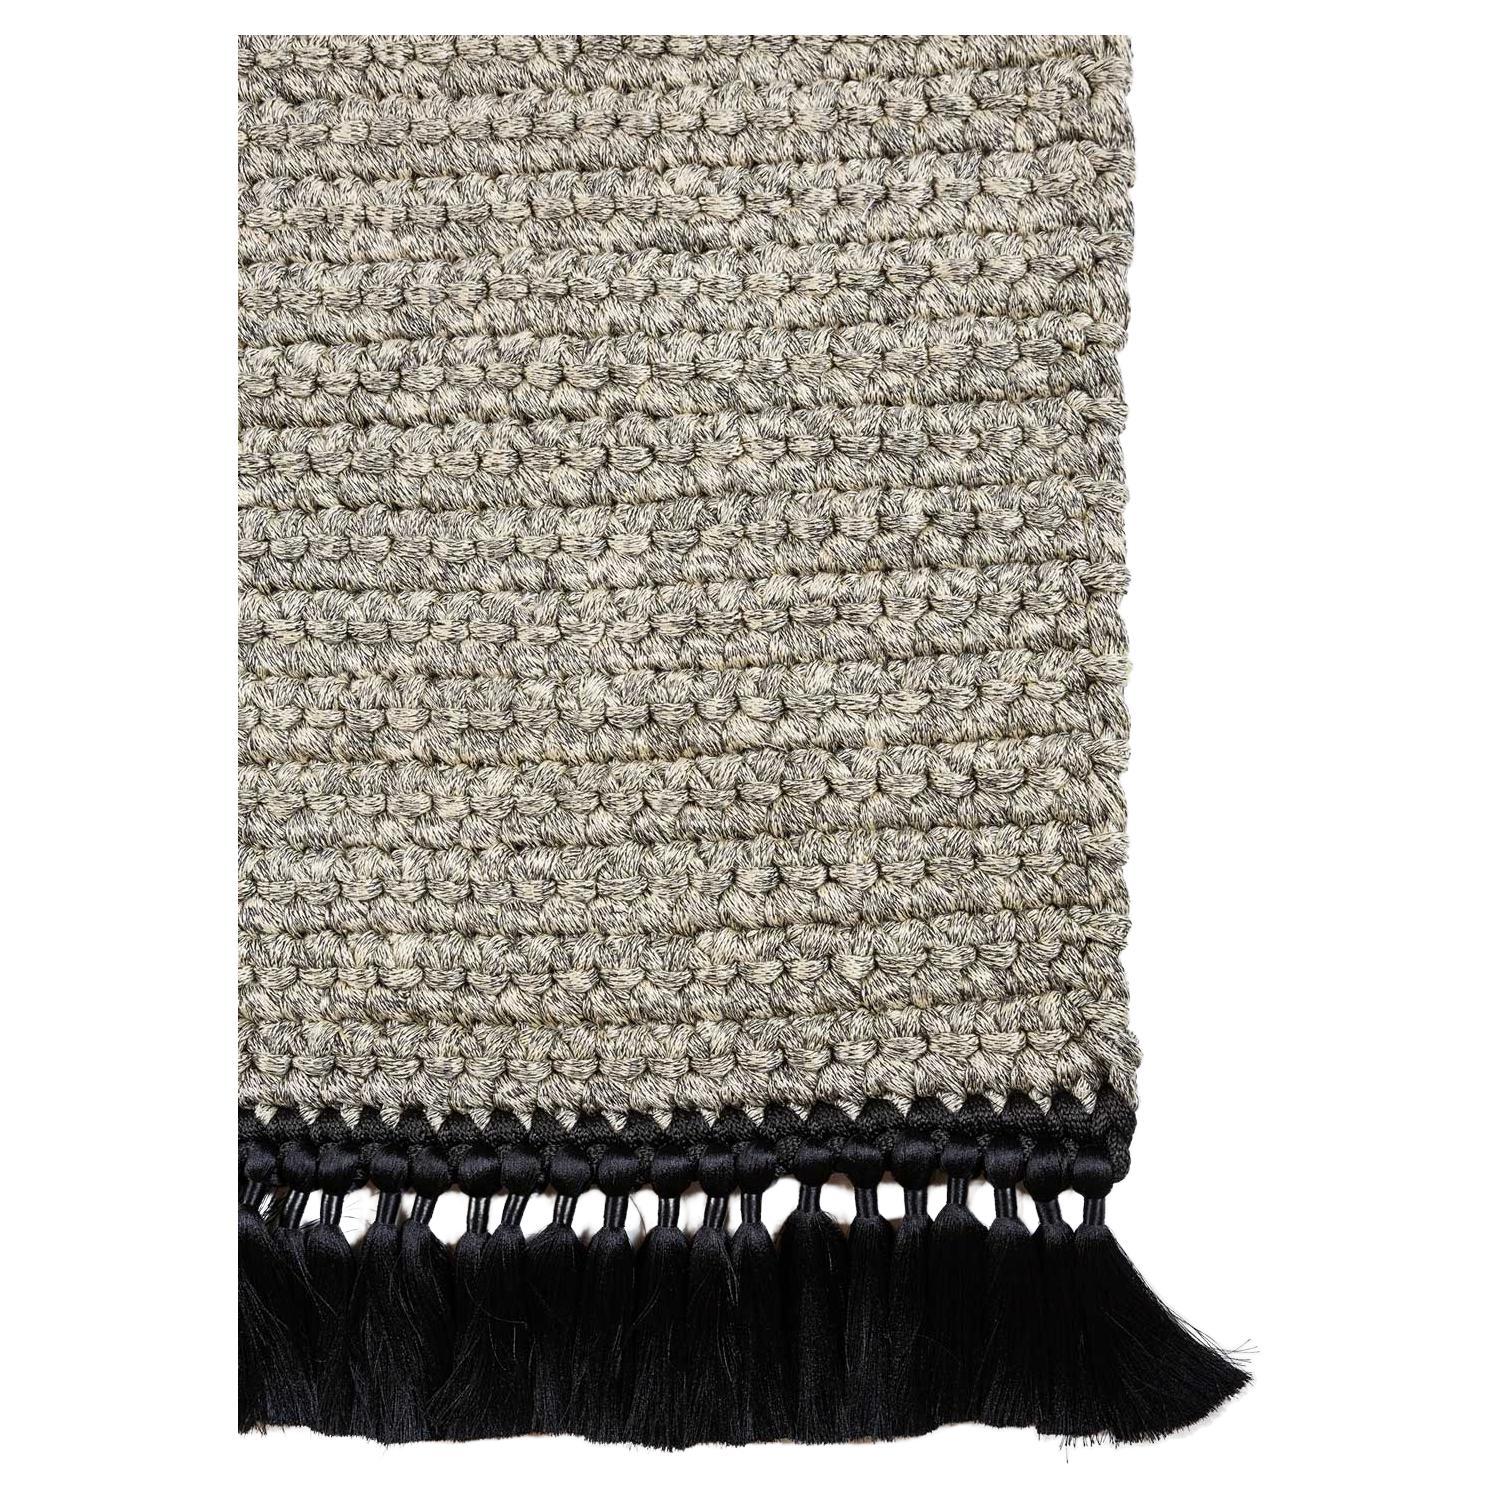 Handmade Crochet XL Thick Rug in Beige Black Made of Cotton & Polyester For Sale